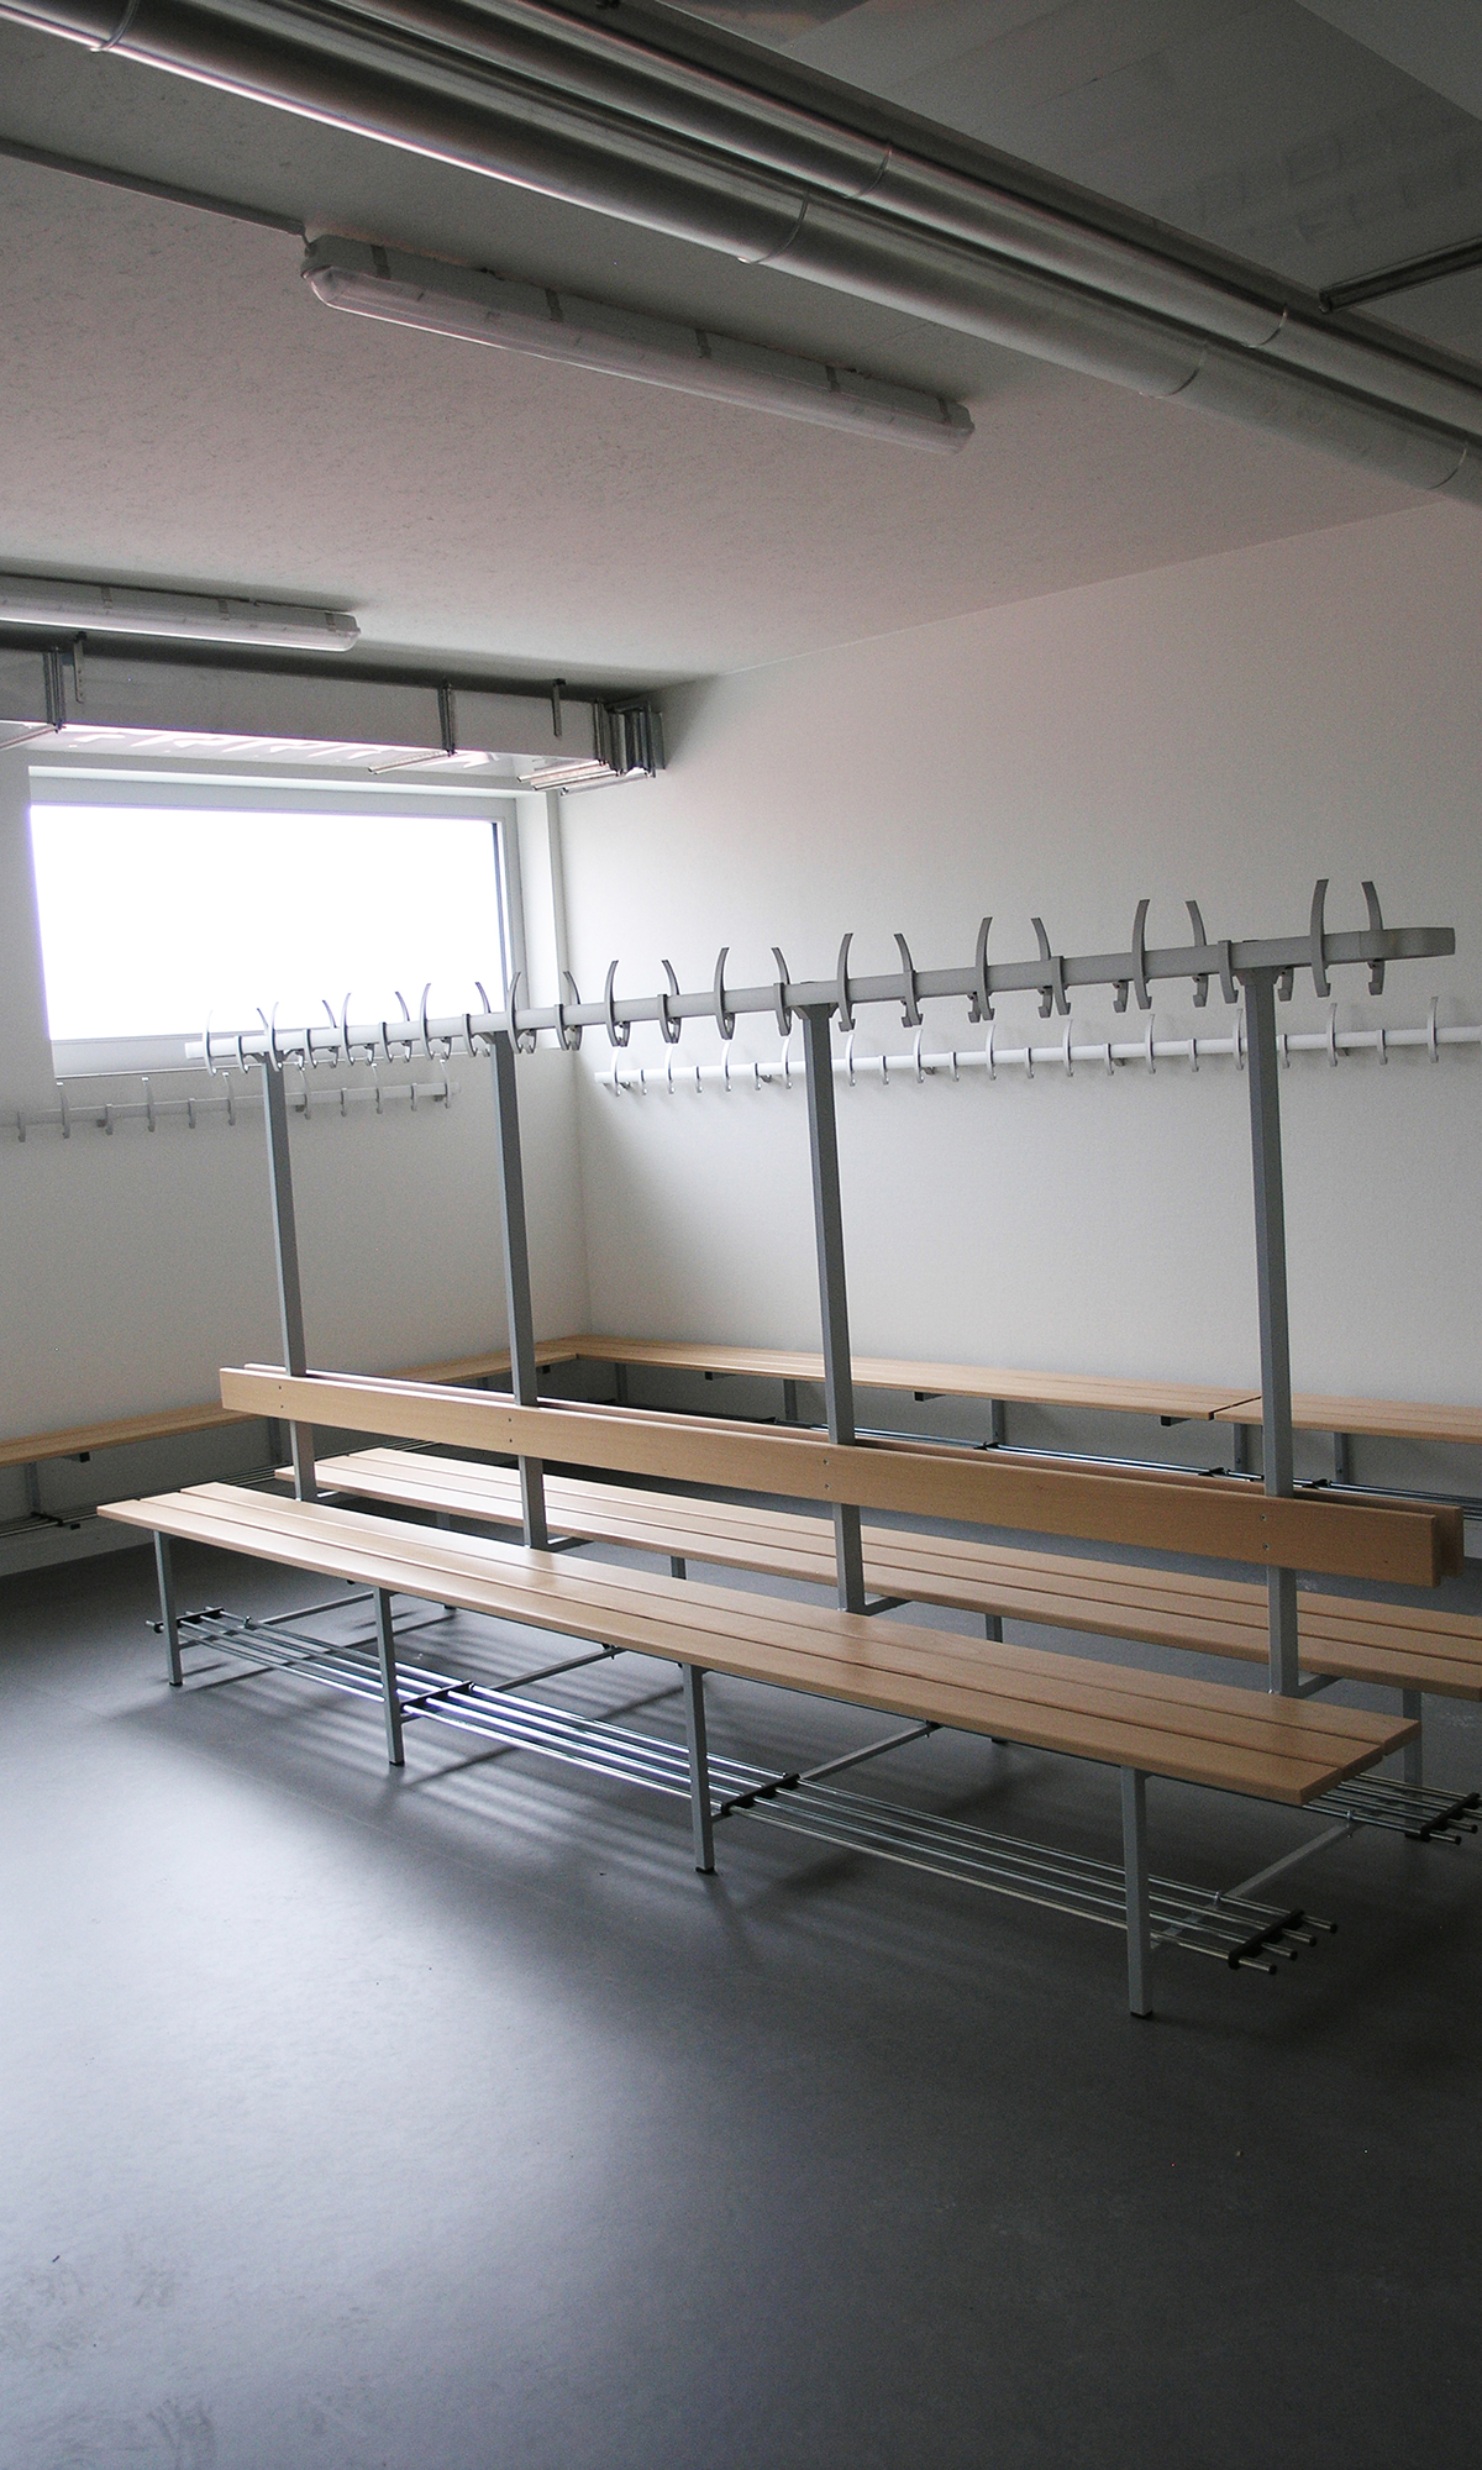 The changing rooms offer sufficient storage space for bags and shoes.